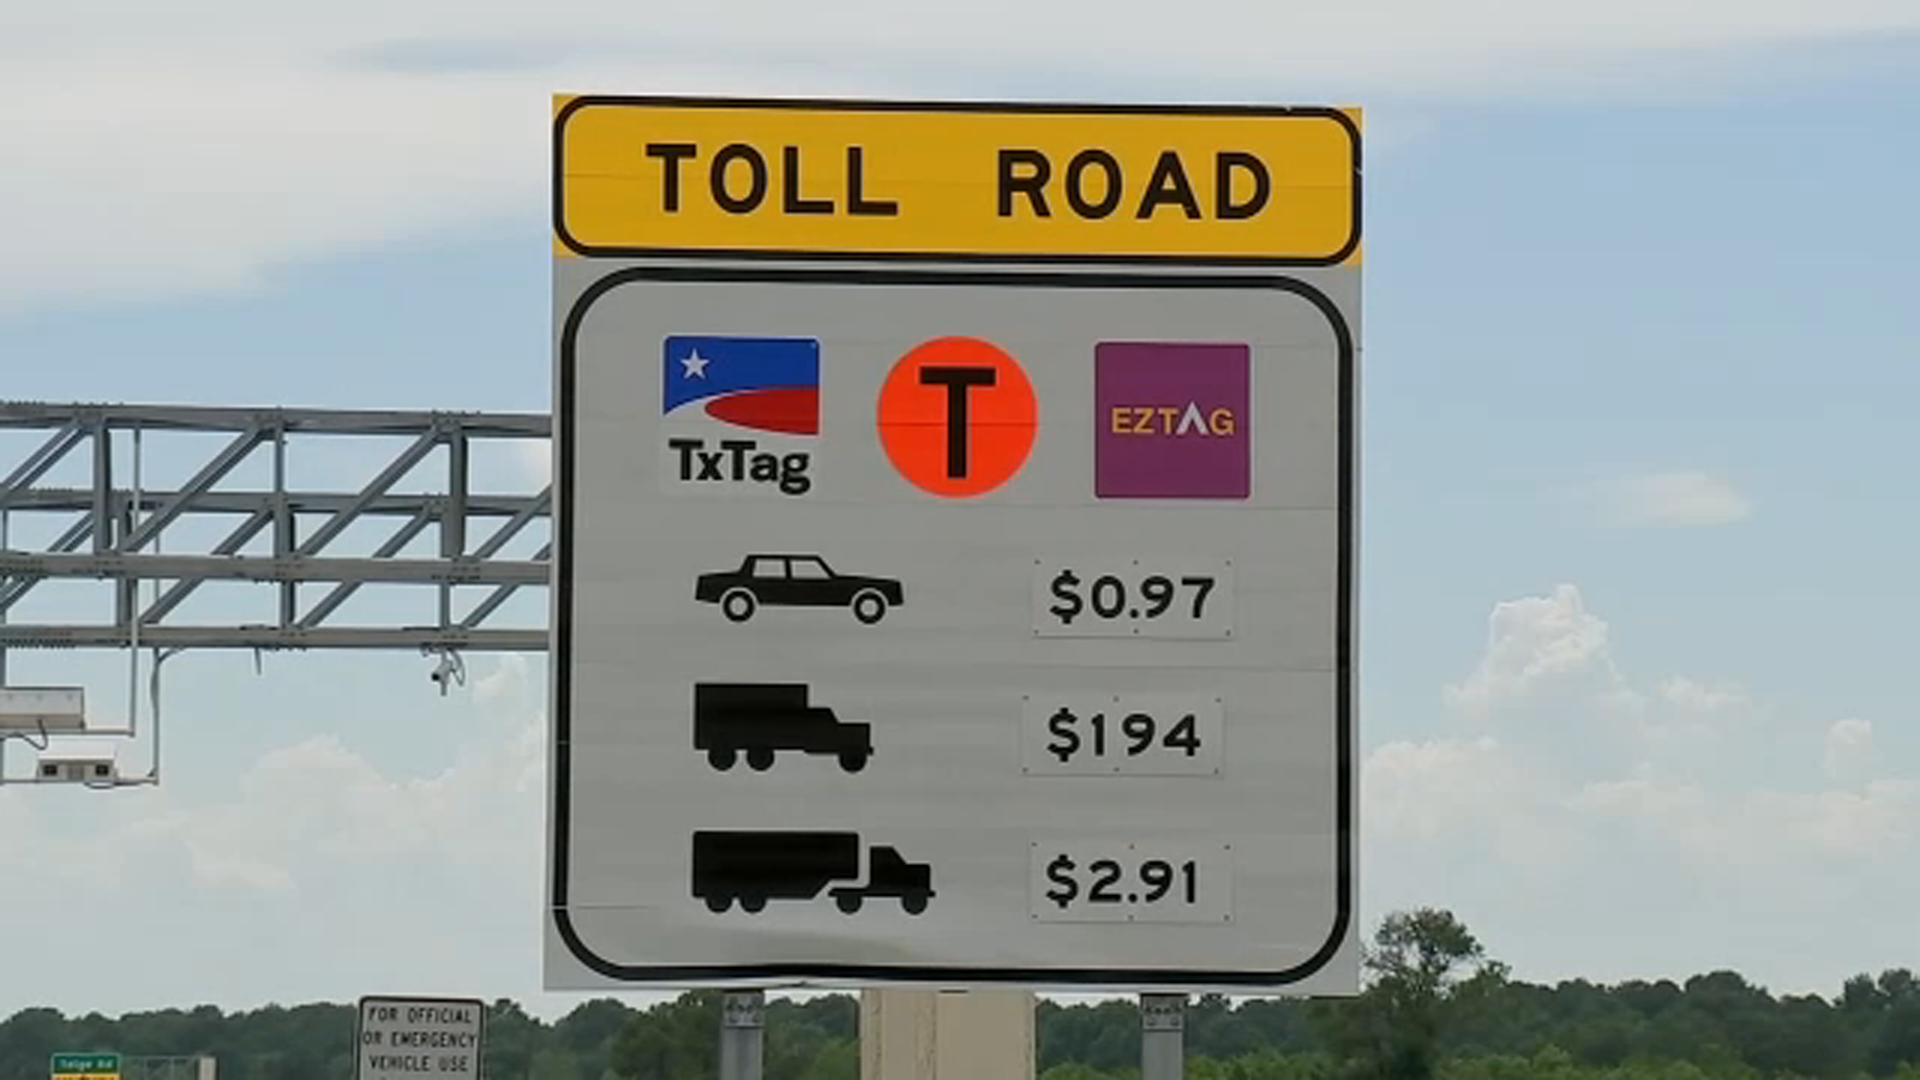 Harris County Toll Road Authority starts crackdown on violators with unpaid  tolls on Wednesday - ABC13 Houston